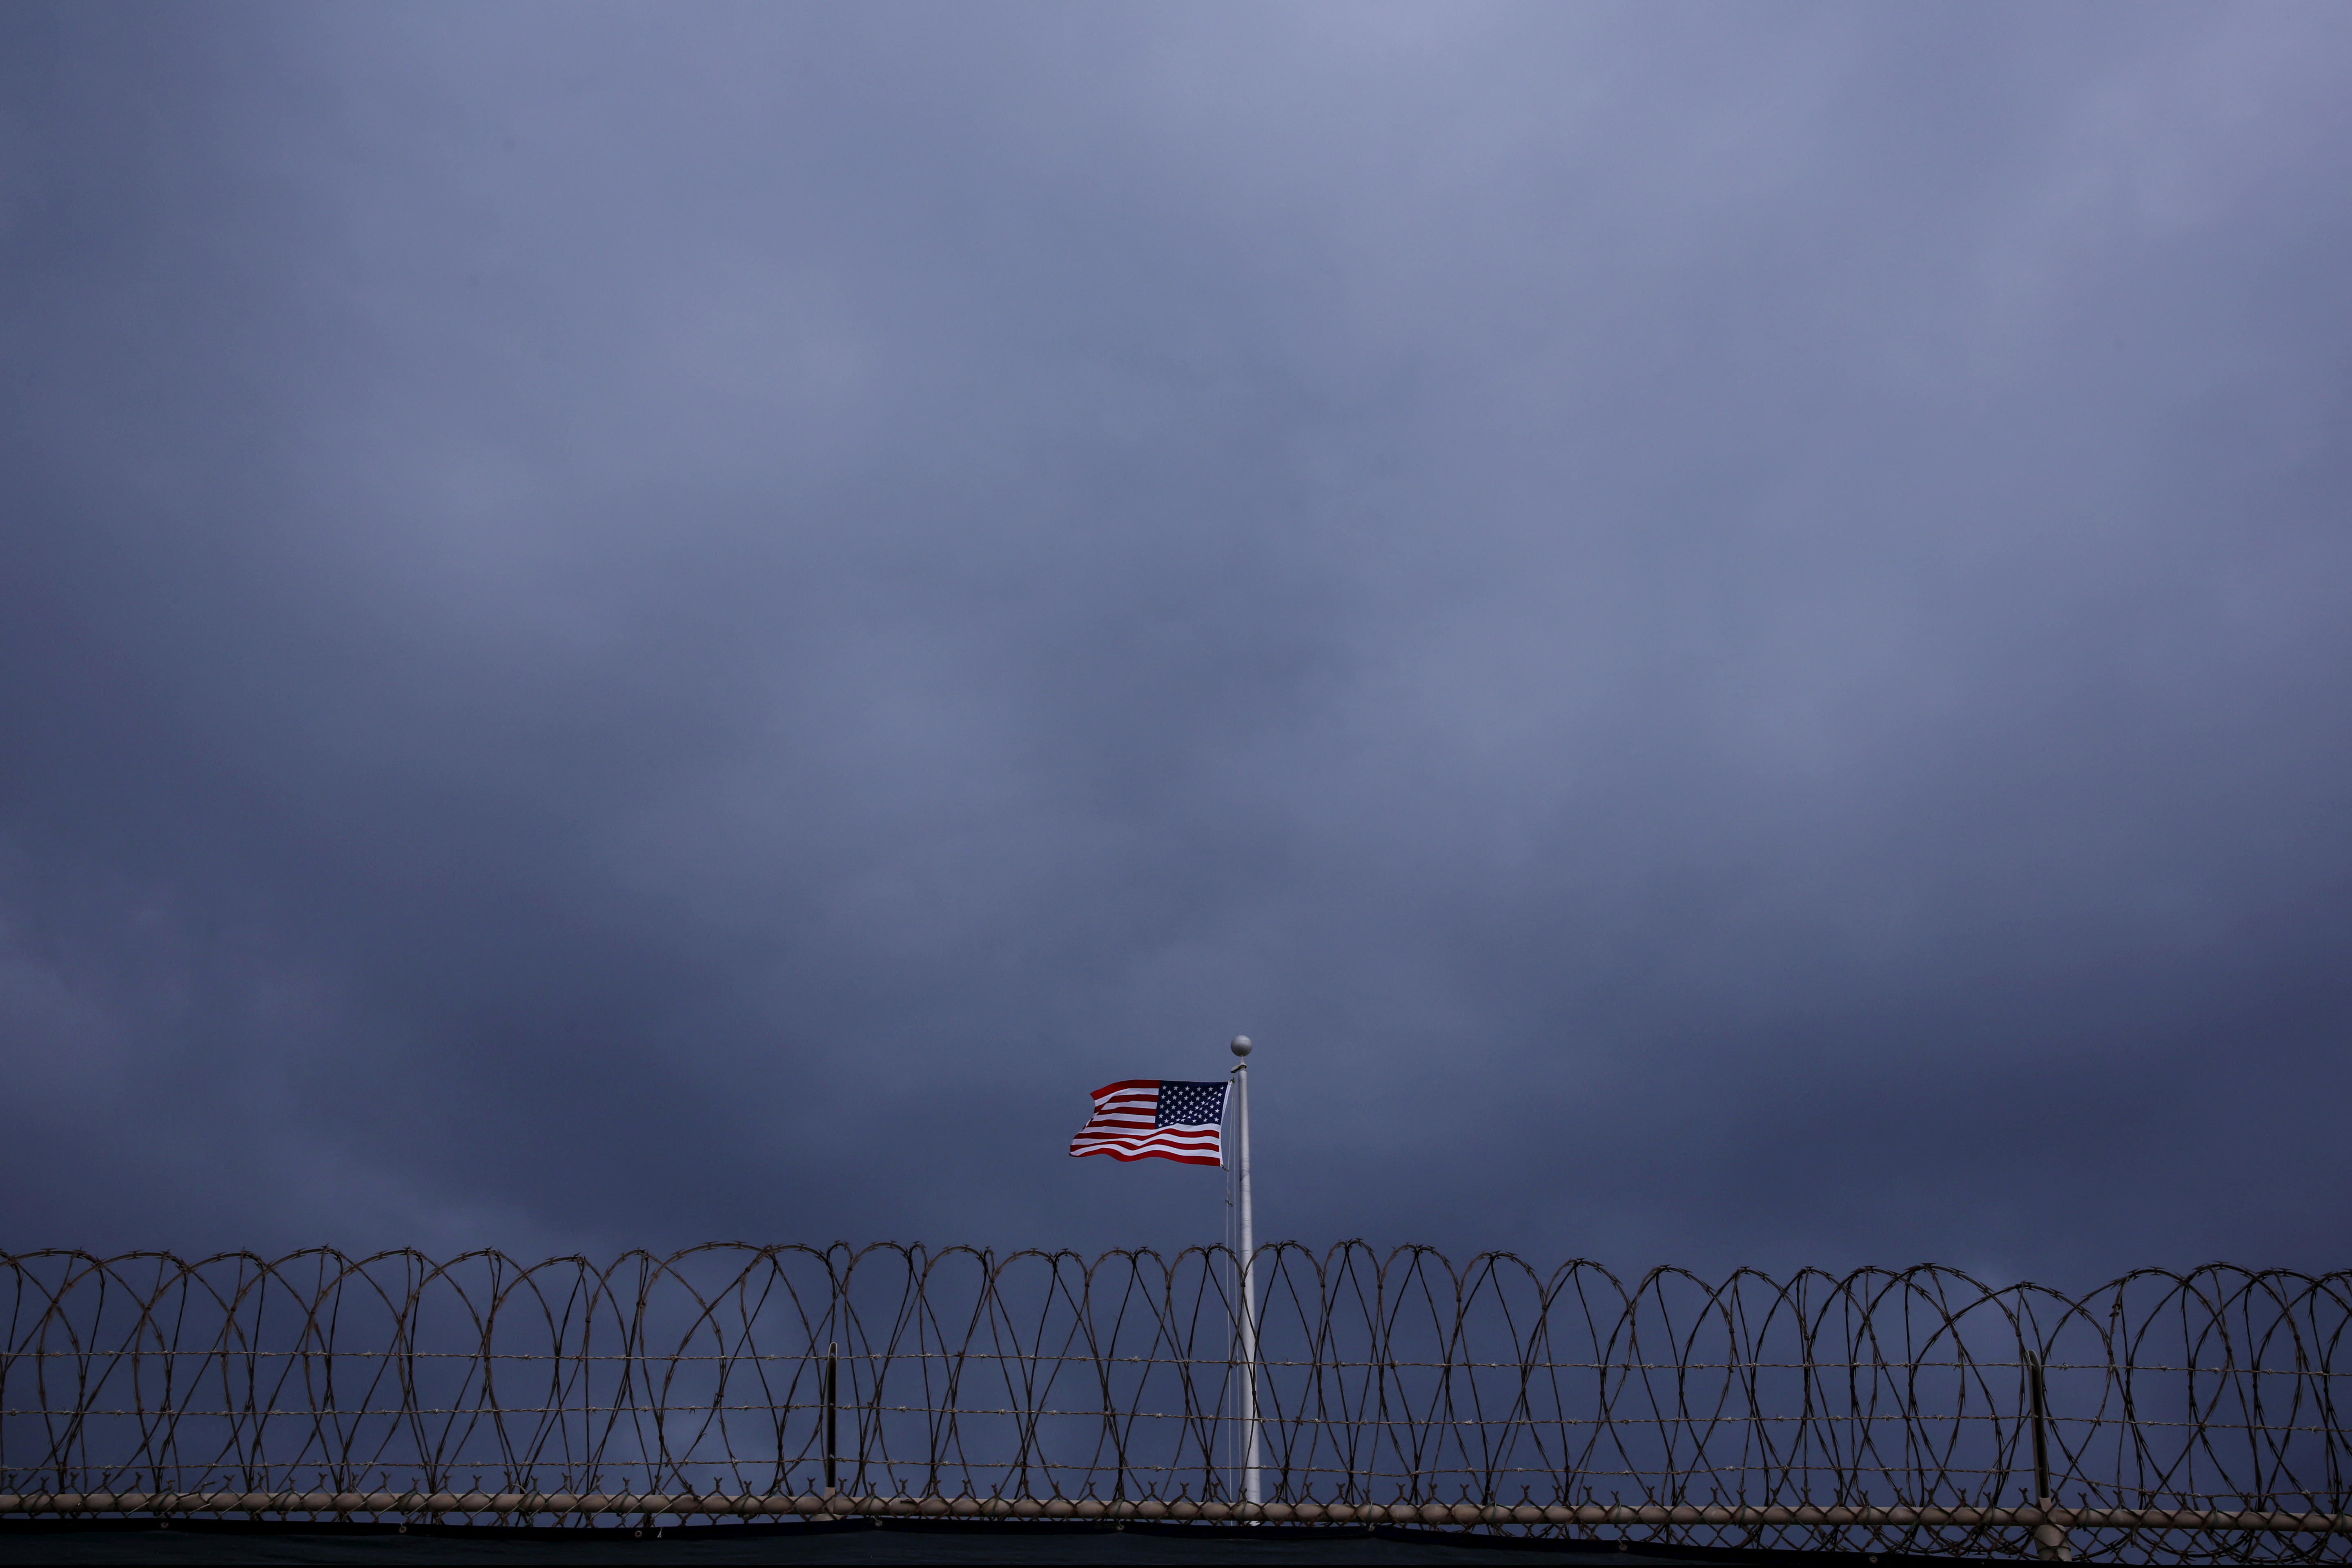 The United States flag flies inside of Joint Task Force Guantanamo Camp VI at the U.S. Naval Base in Guantanamo Bay, Cuba